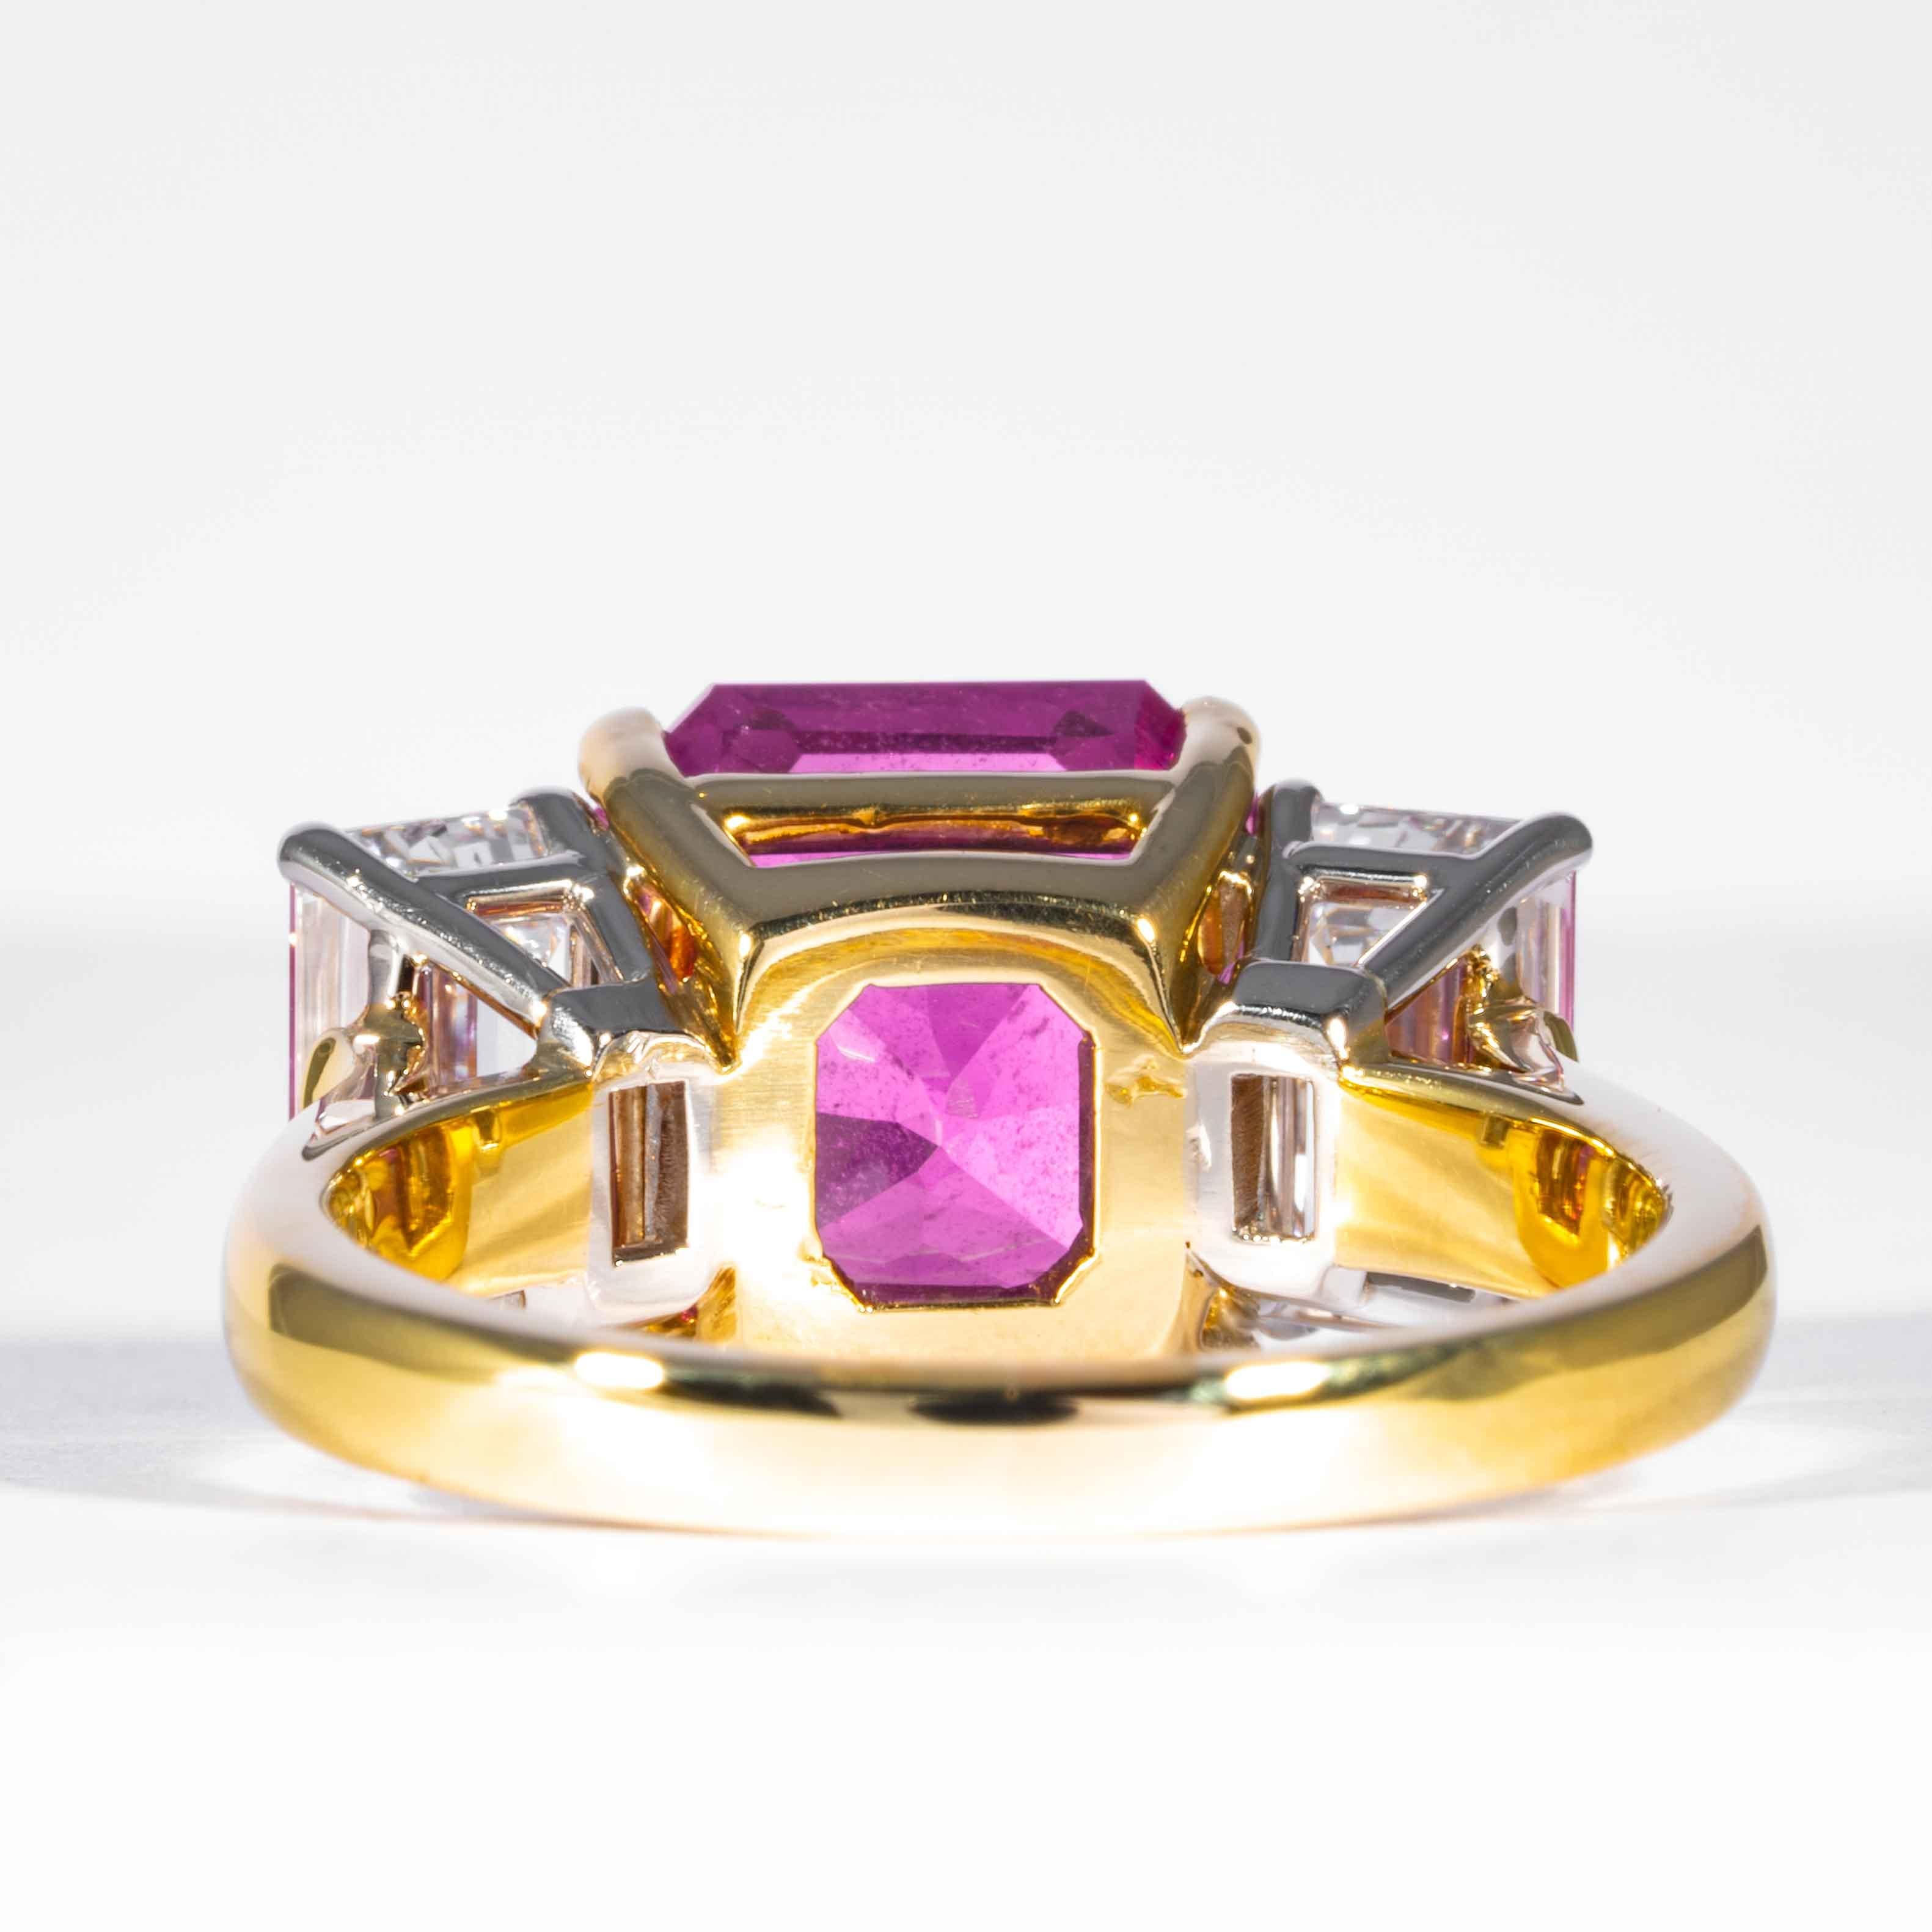 Shreve, Crump & Low 6.13 Carat GIA Certified Pink Sapphire and Diamond Ring 3